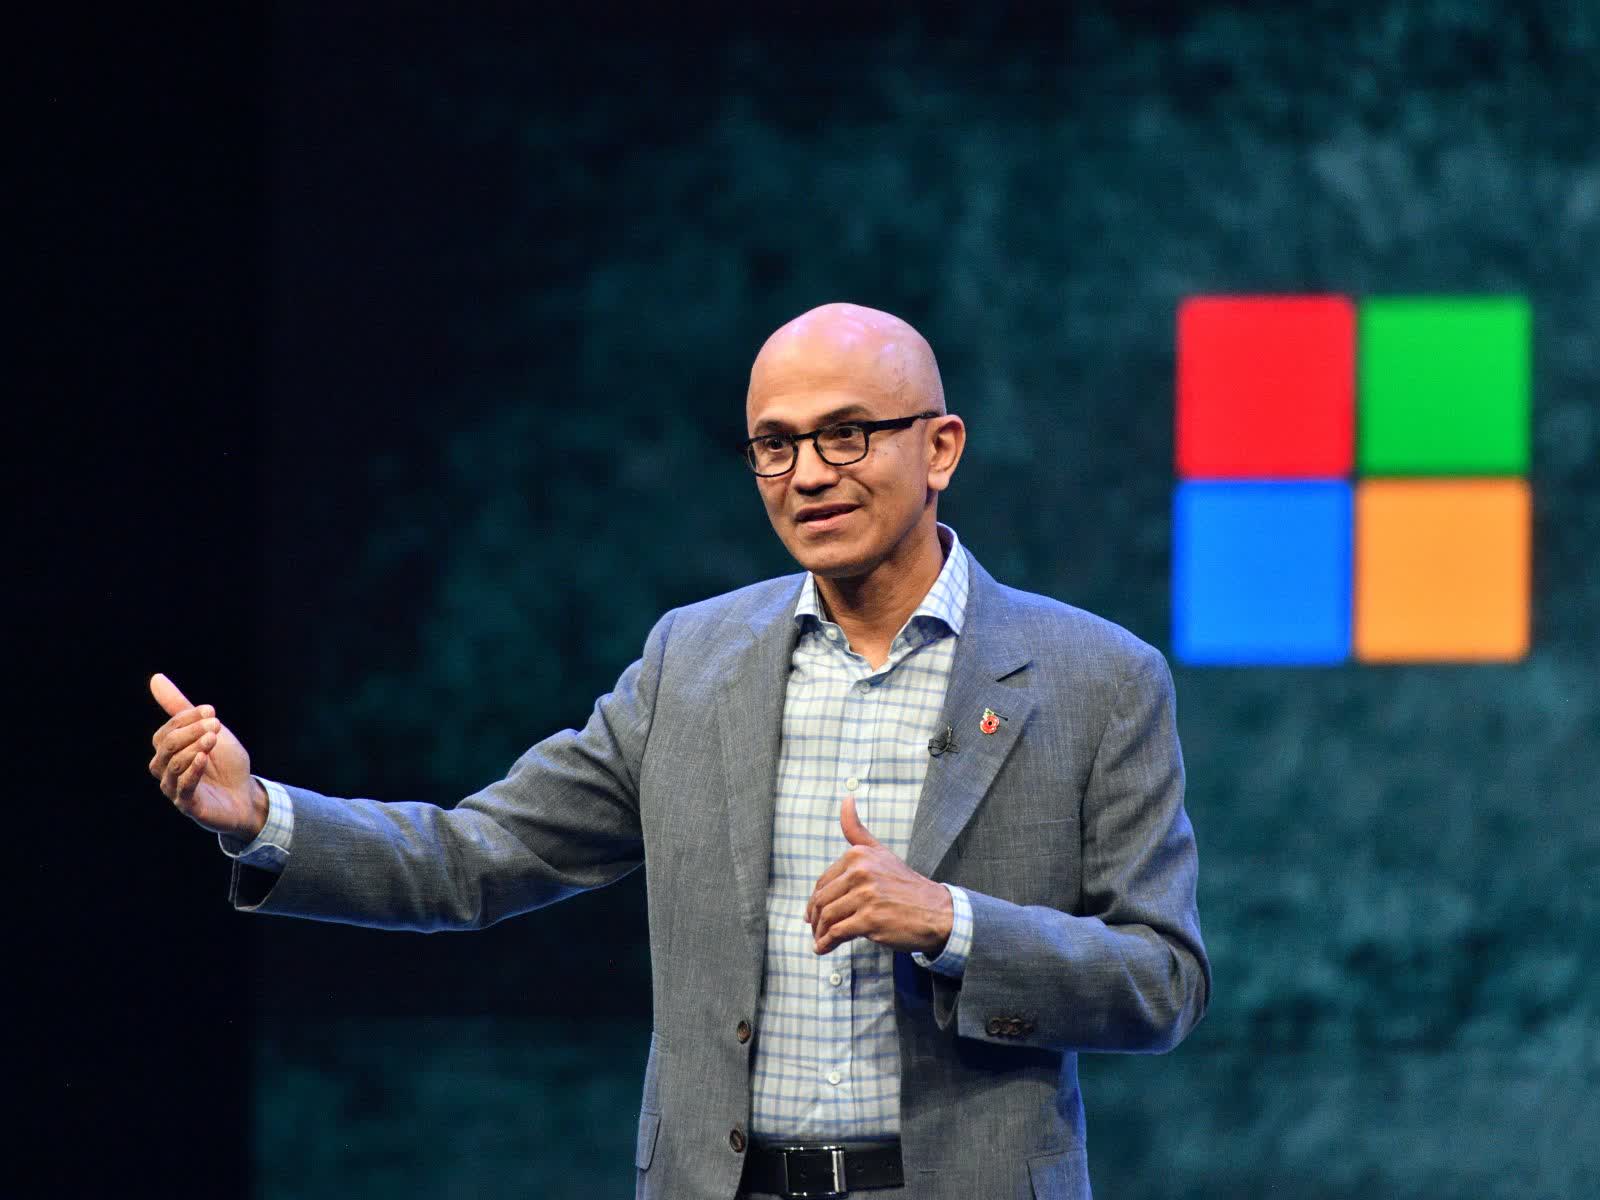 Microsoft CEO Satya Nadella says trying to buy TikTok was the 'strangest thing' he's ever worked on